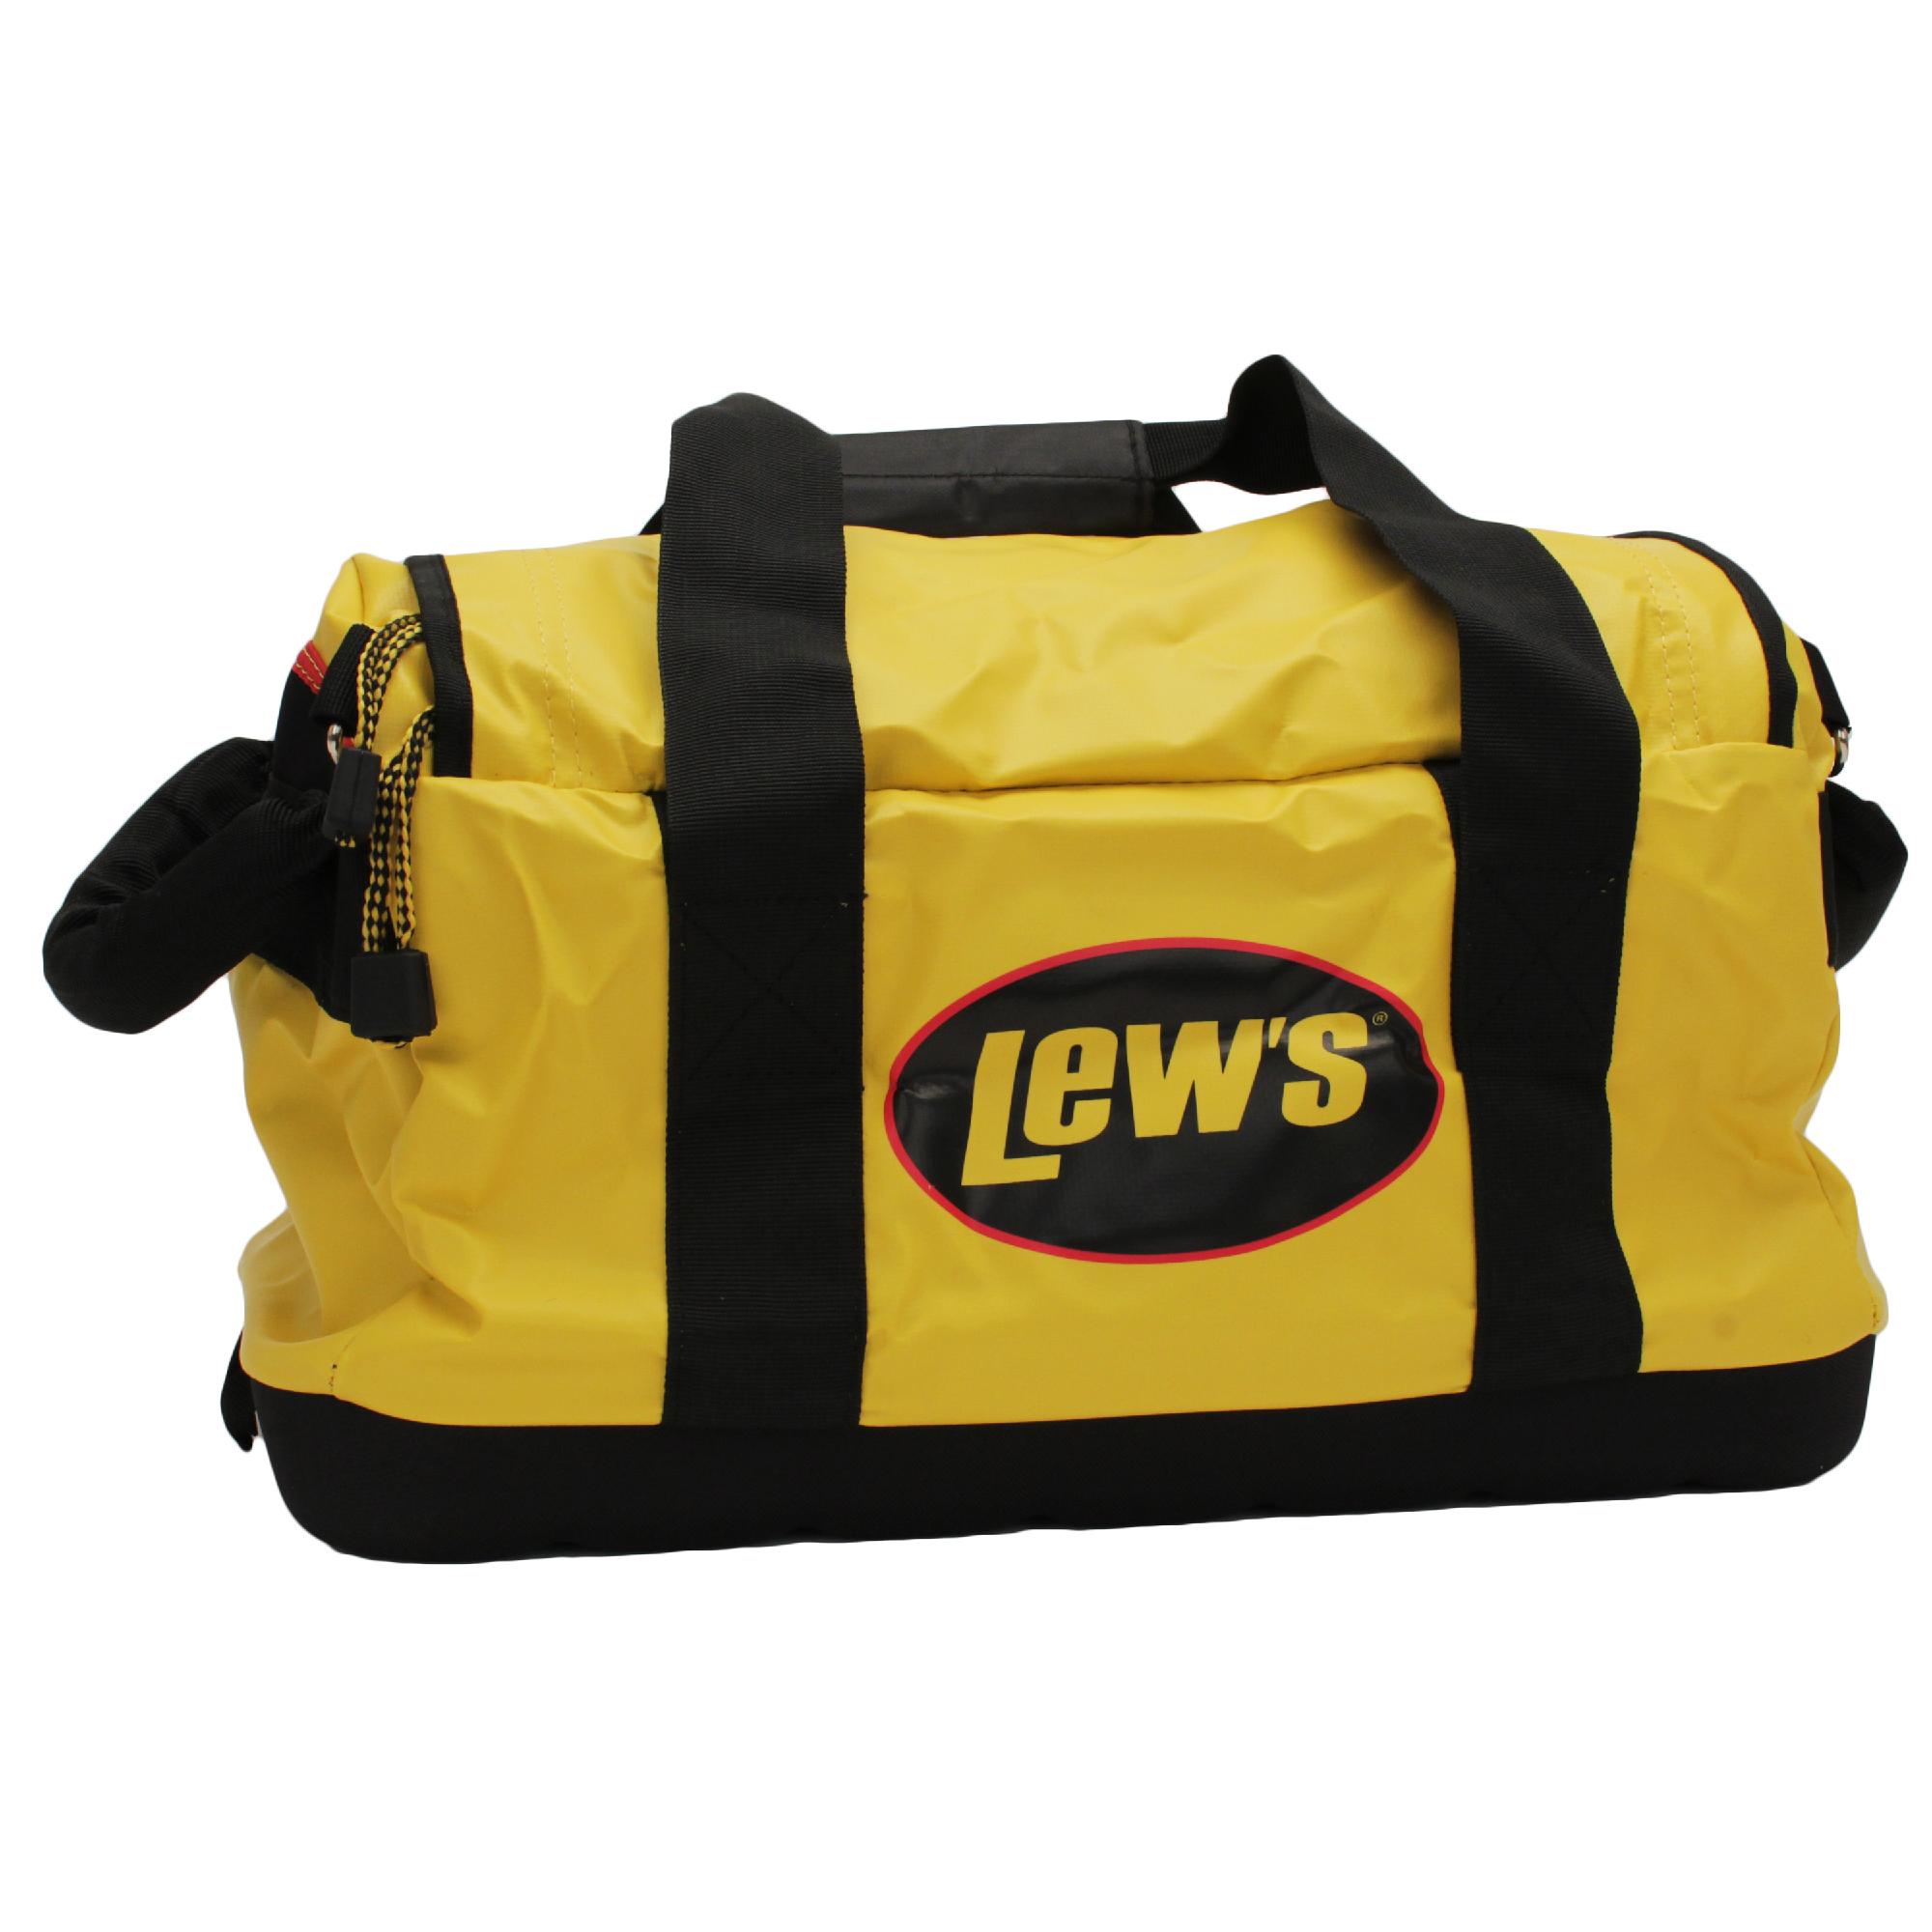 Lew’s Speed Boat Bag 18″